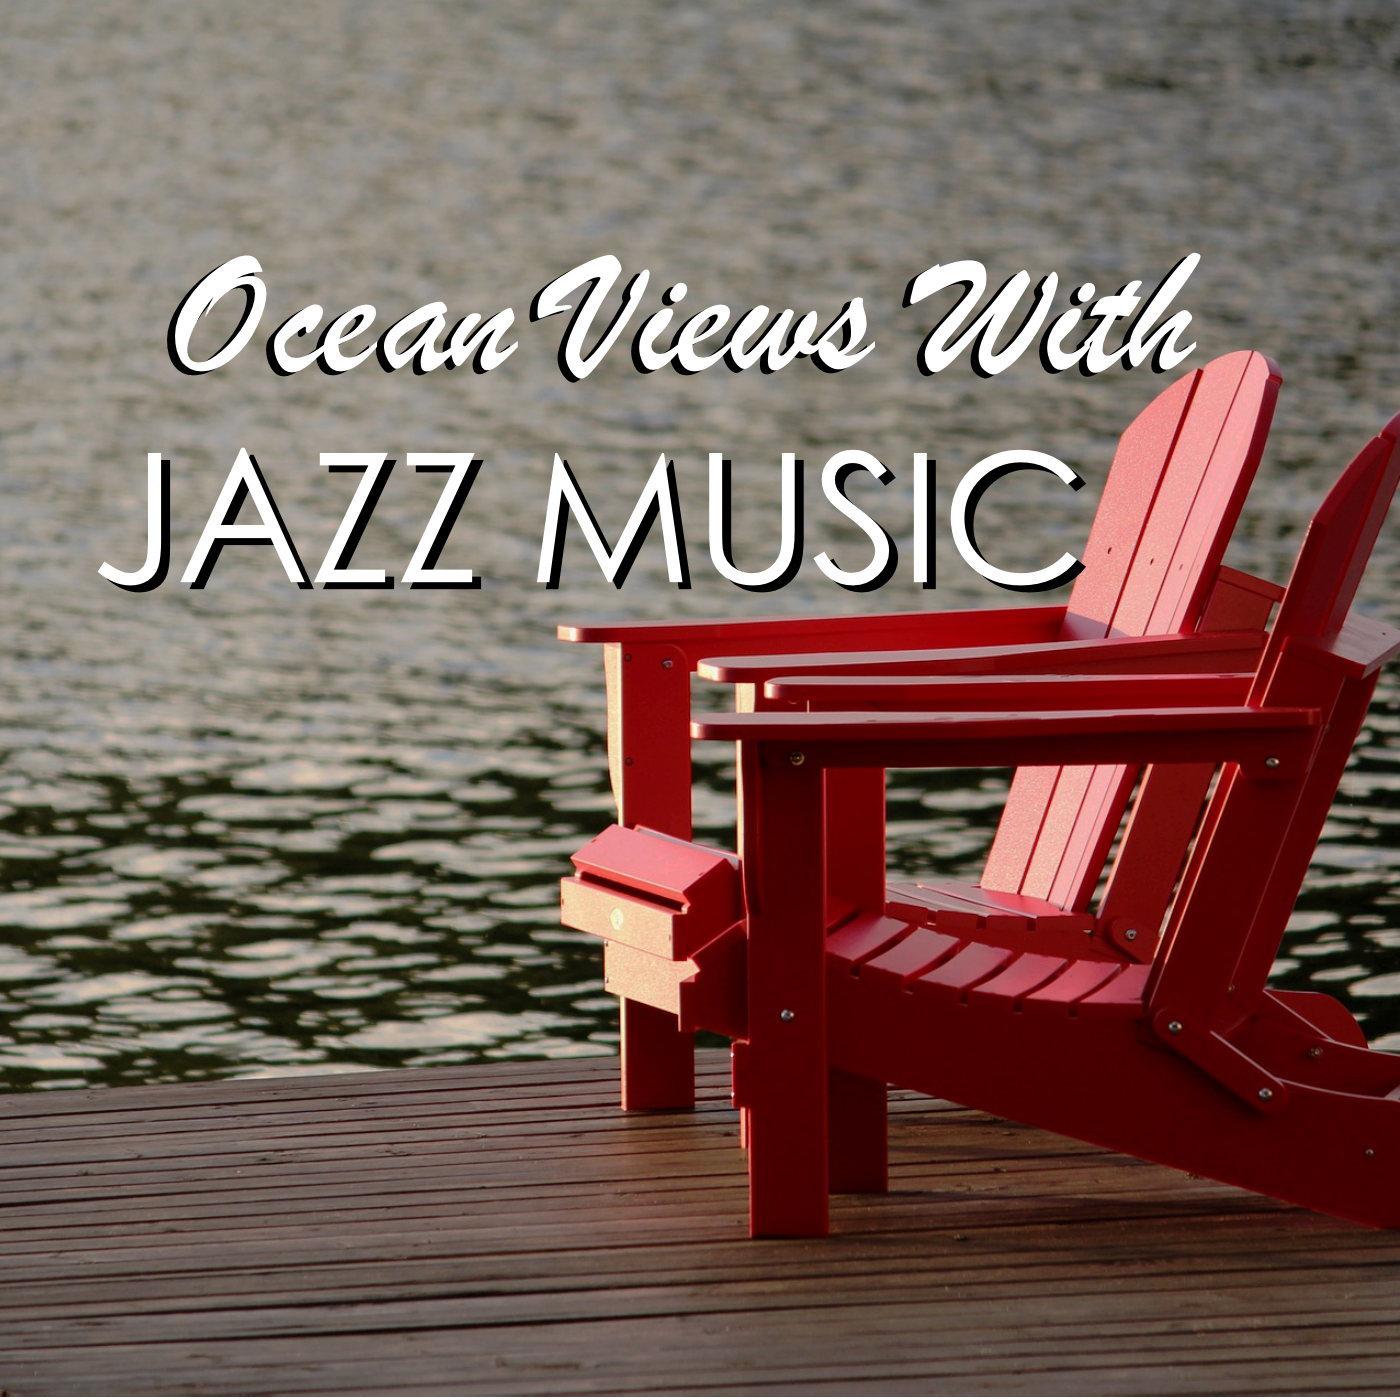 Ocean Views With Jazz Music